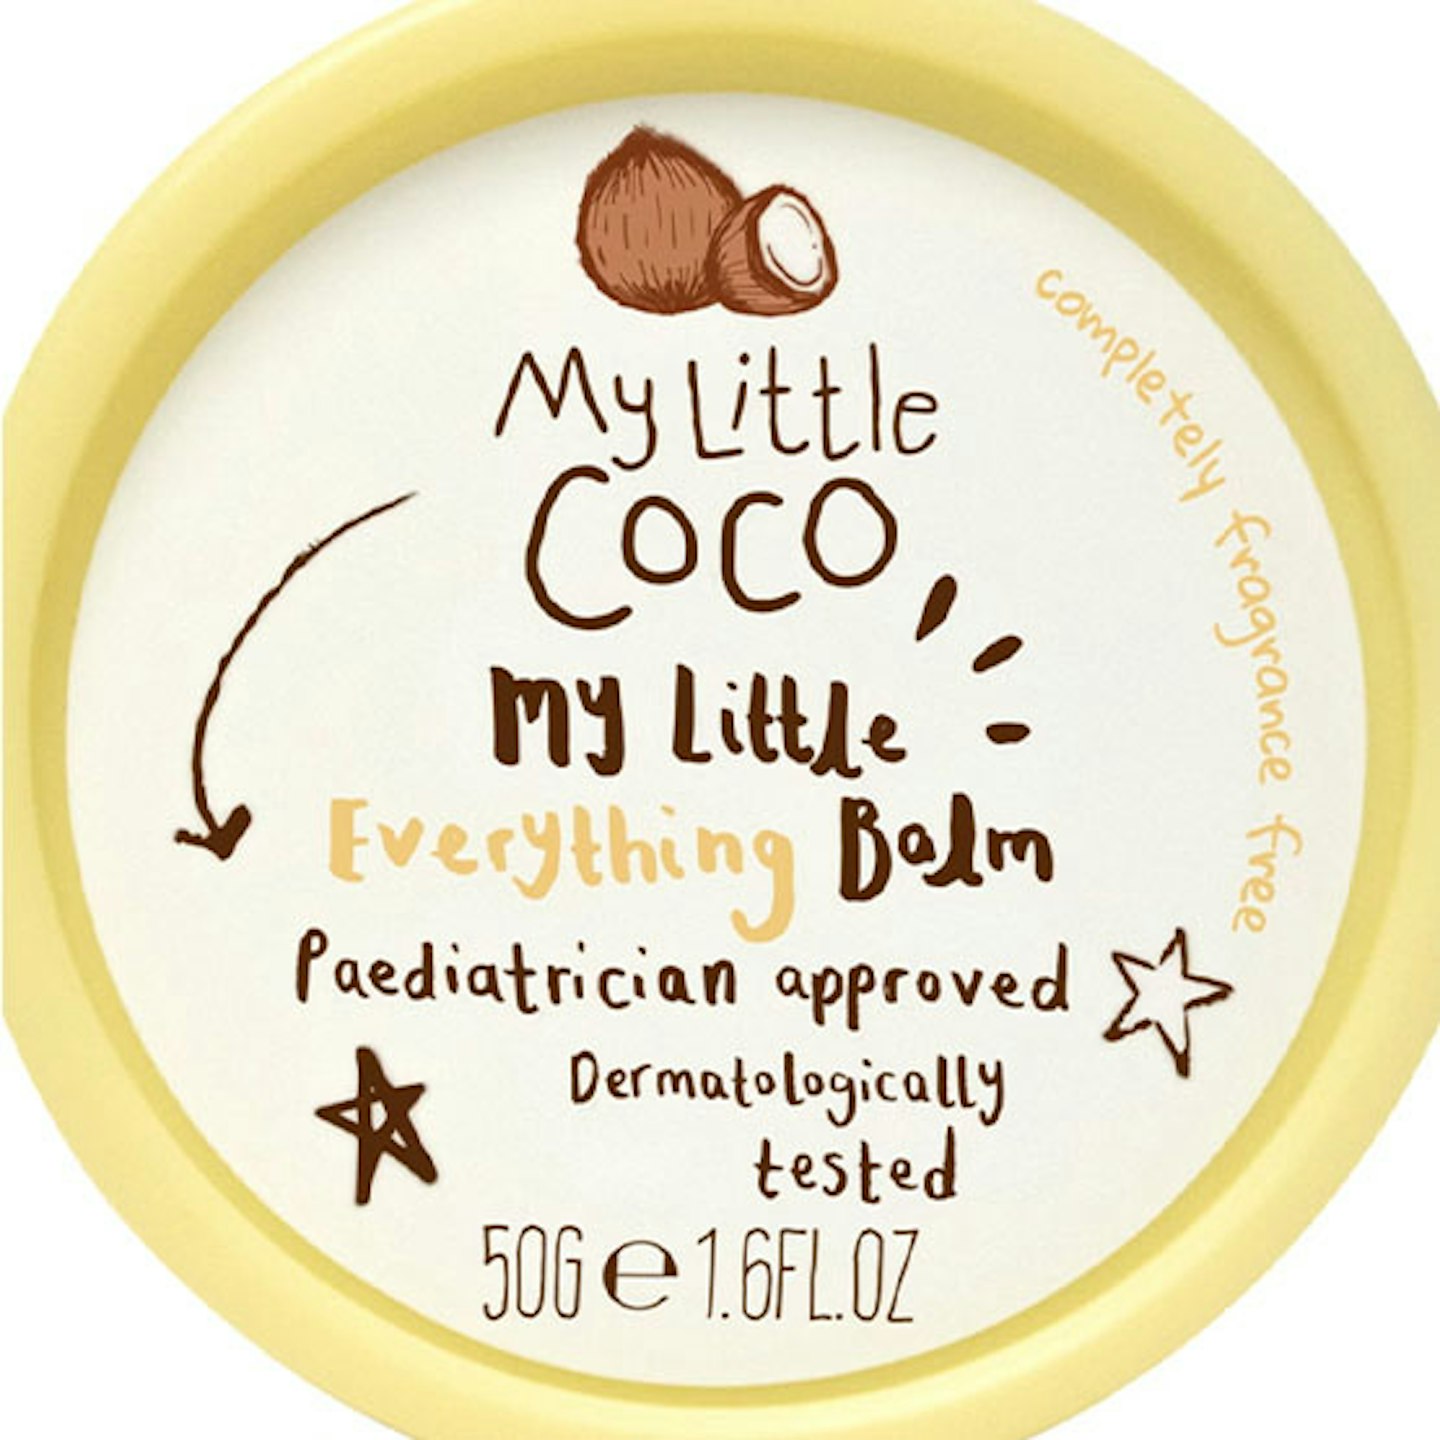 My Little Coco Everything Balm